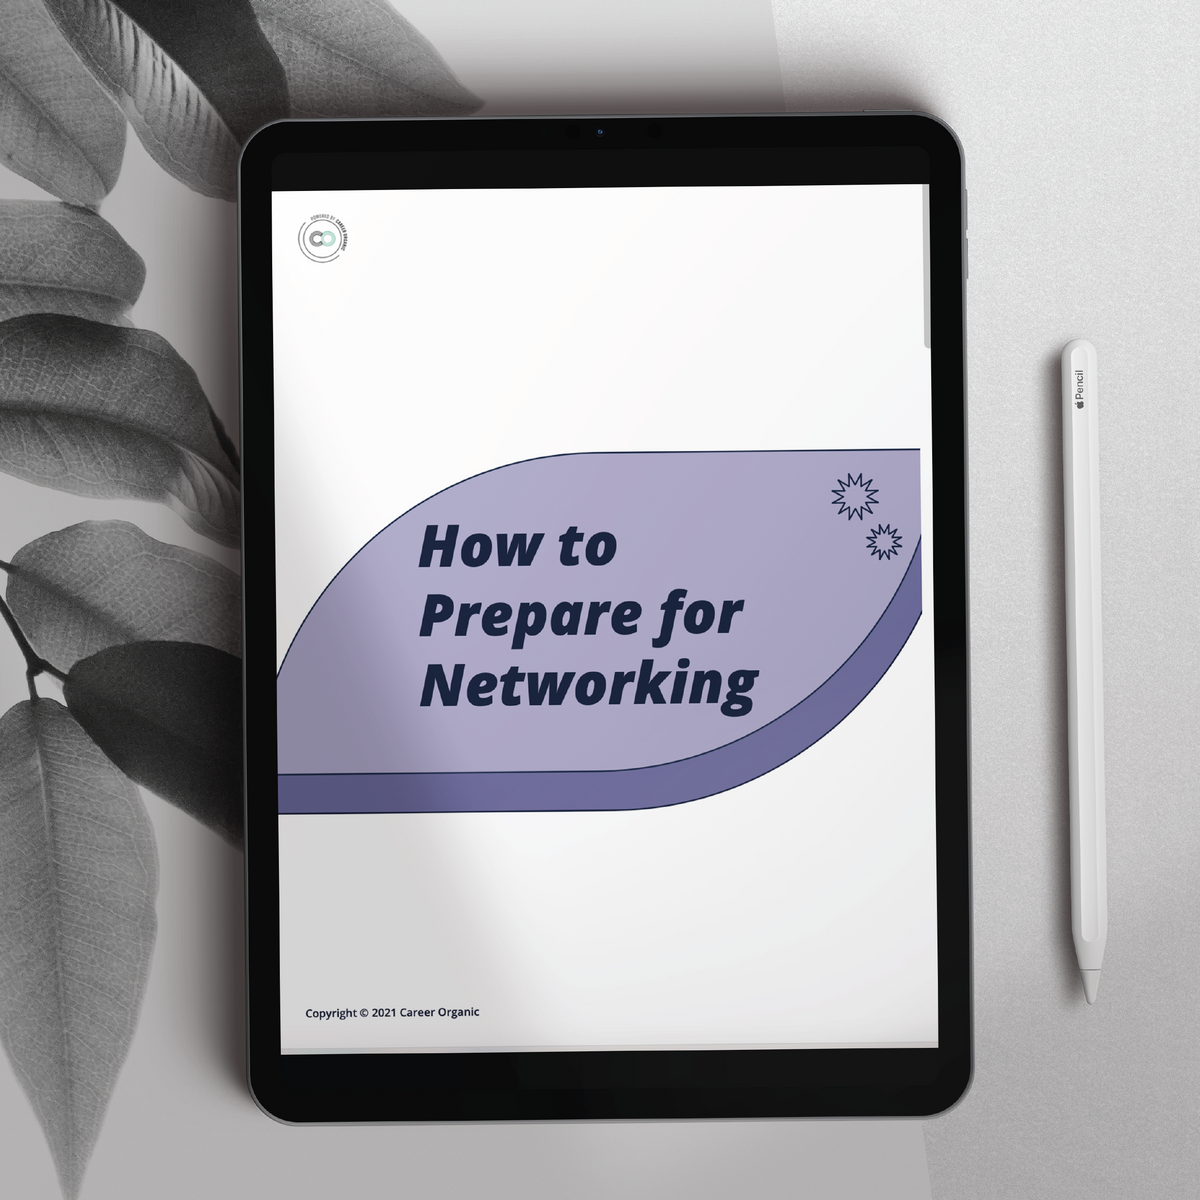 How to Prepare for Networking